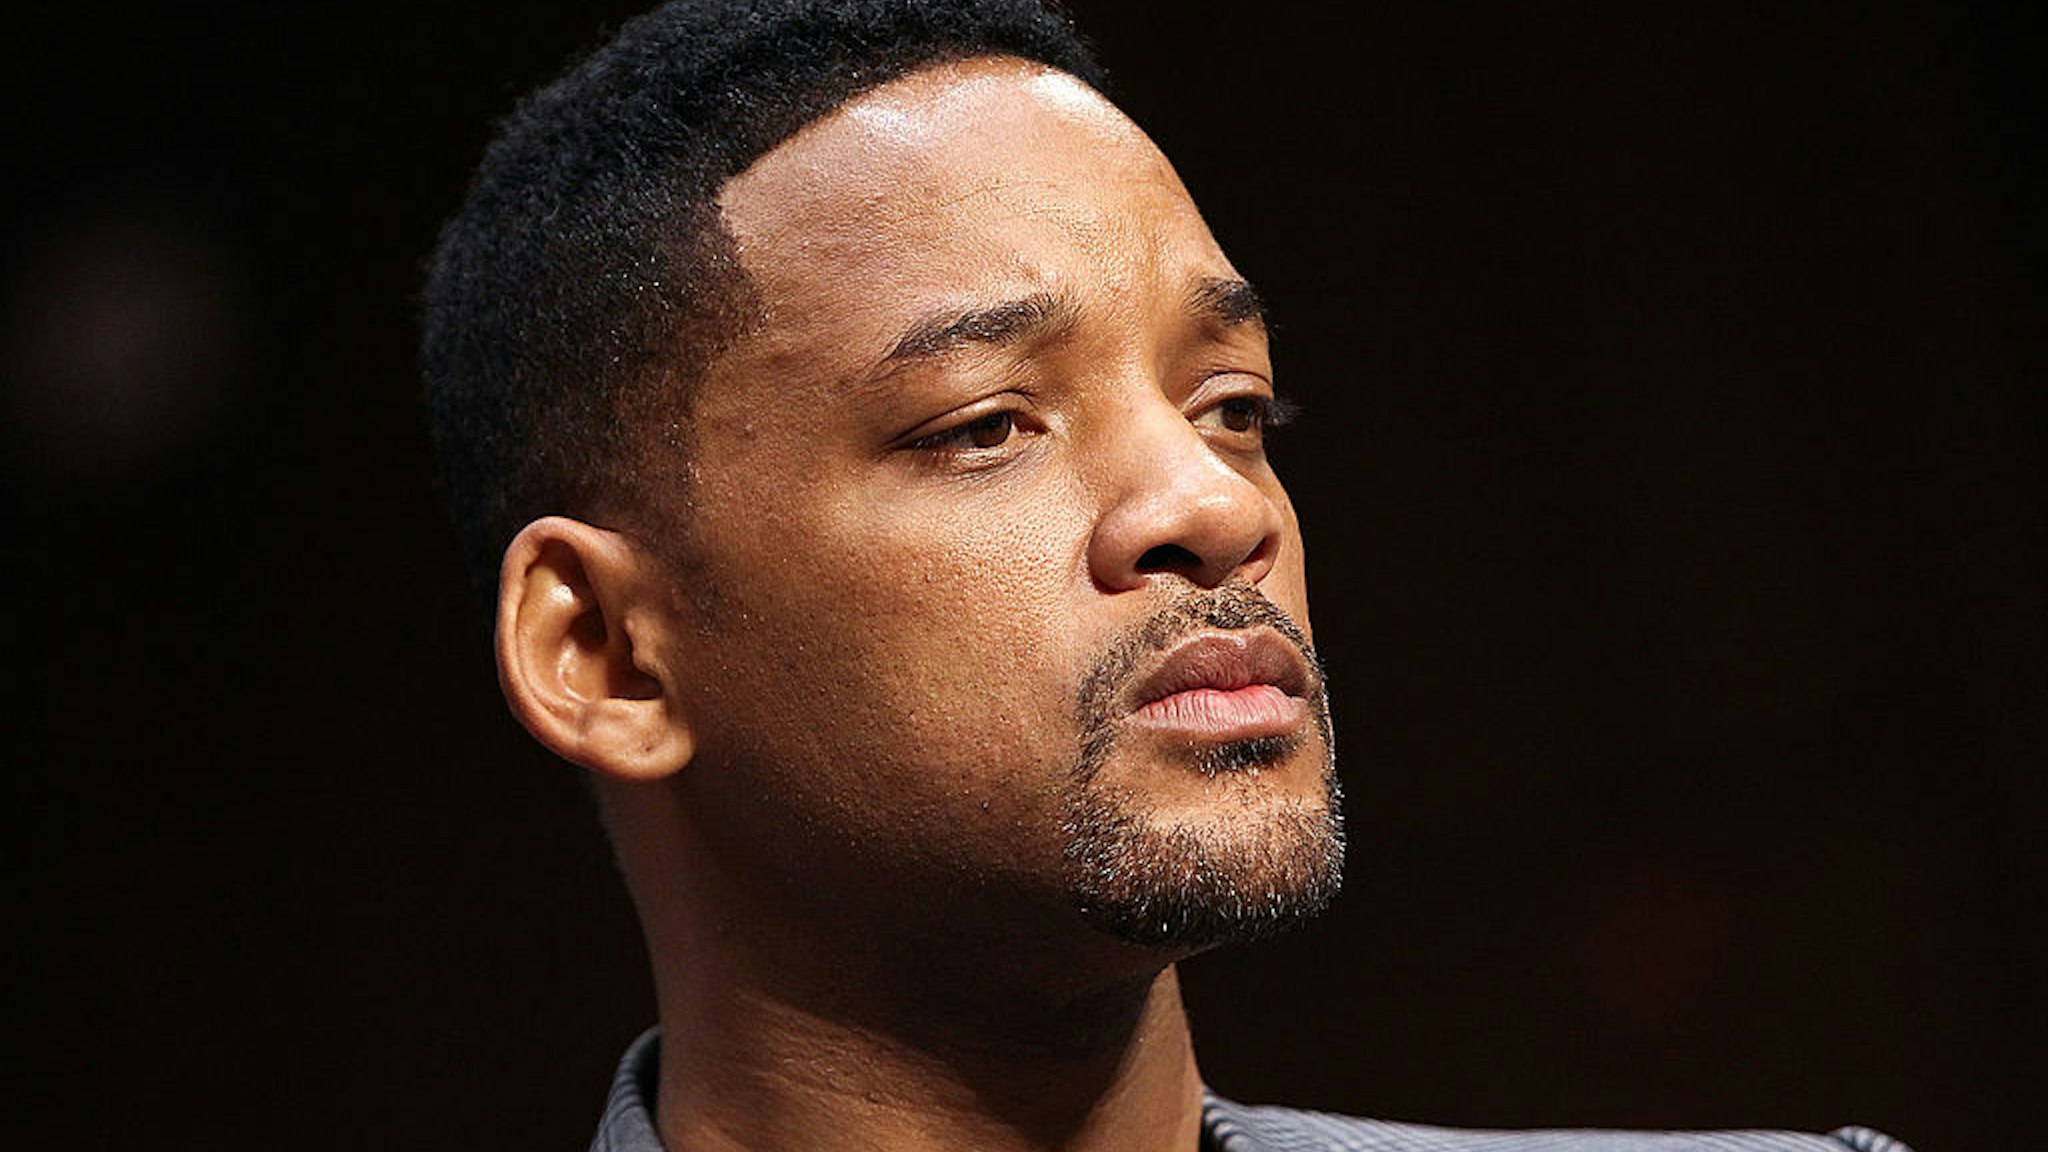 WASHINGTON, DC - JULY 17: Actor Will Smith listens to testimony at the "The Next Ten Years In The Fight Against Human Trafficking: Attacking The Problem With The Right Tools" Committee Hearing at the Hart Senate Office Building on July 17, 2012 in Washington, DC. (Photo by Paul Morigi/WireImage)